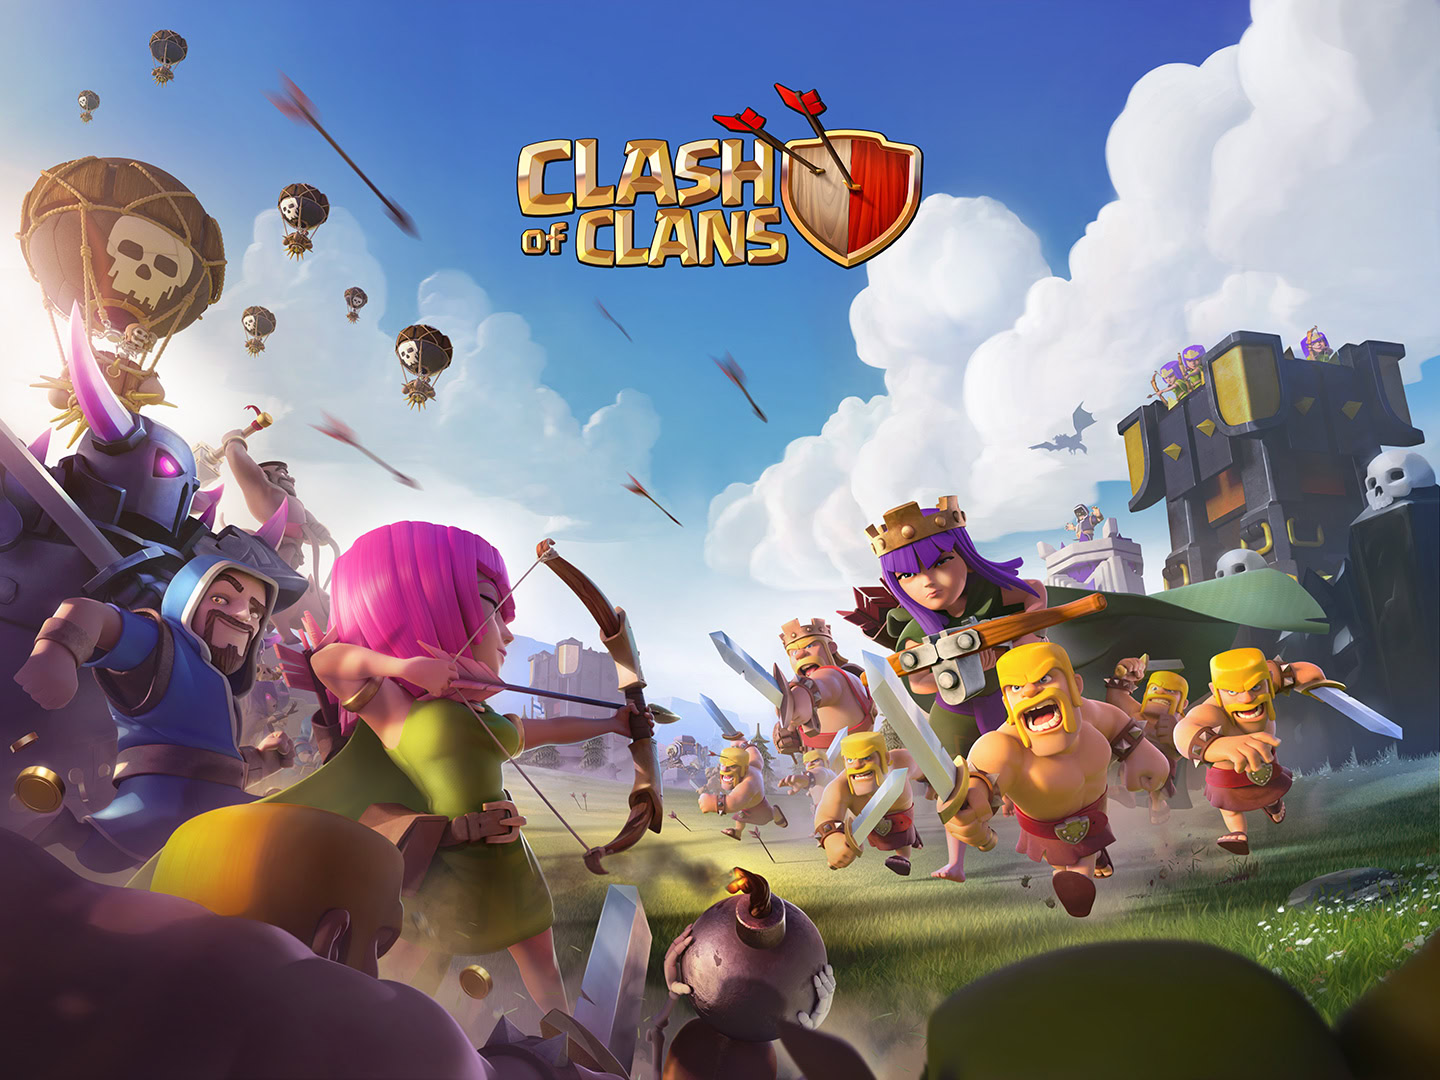 The best kingdom building games like Clash of Clans - Android Authority